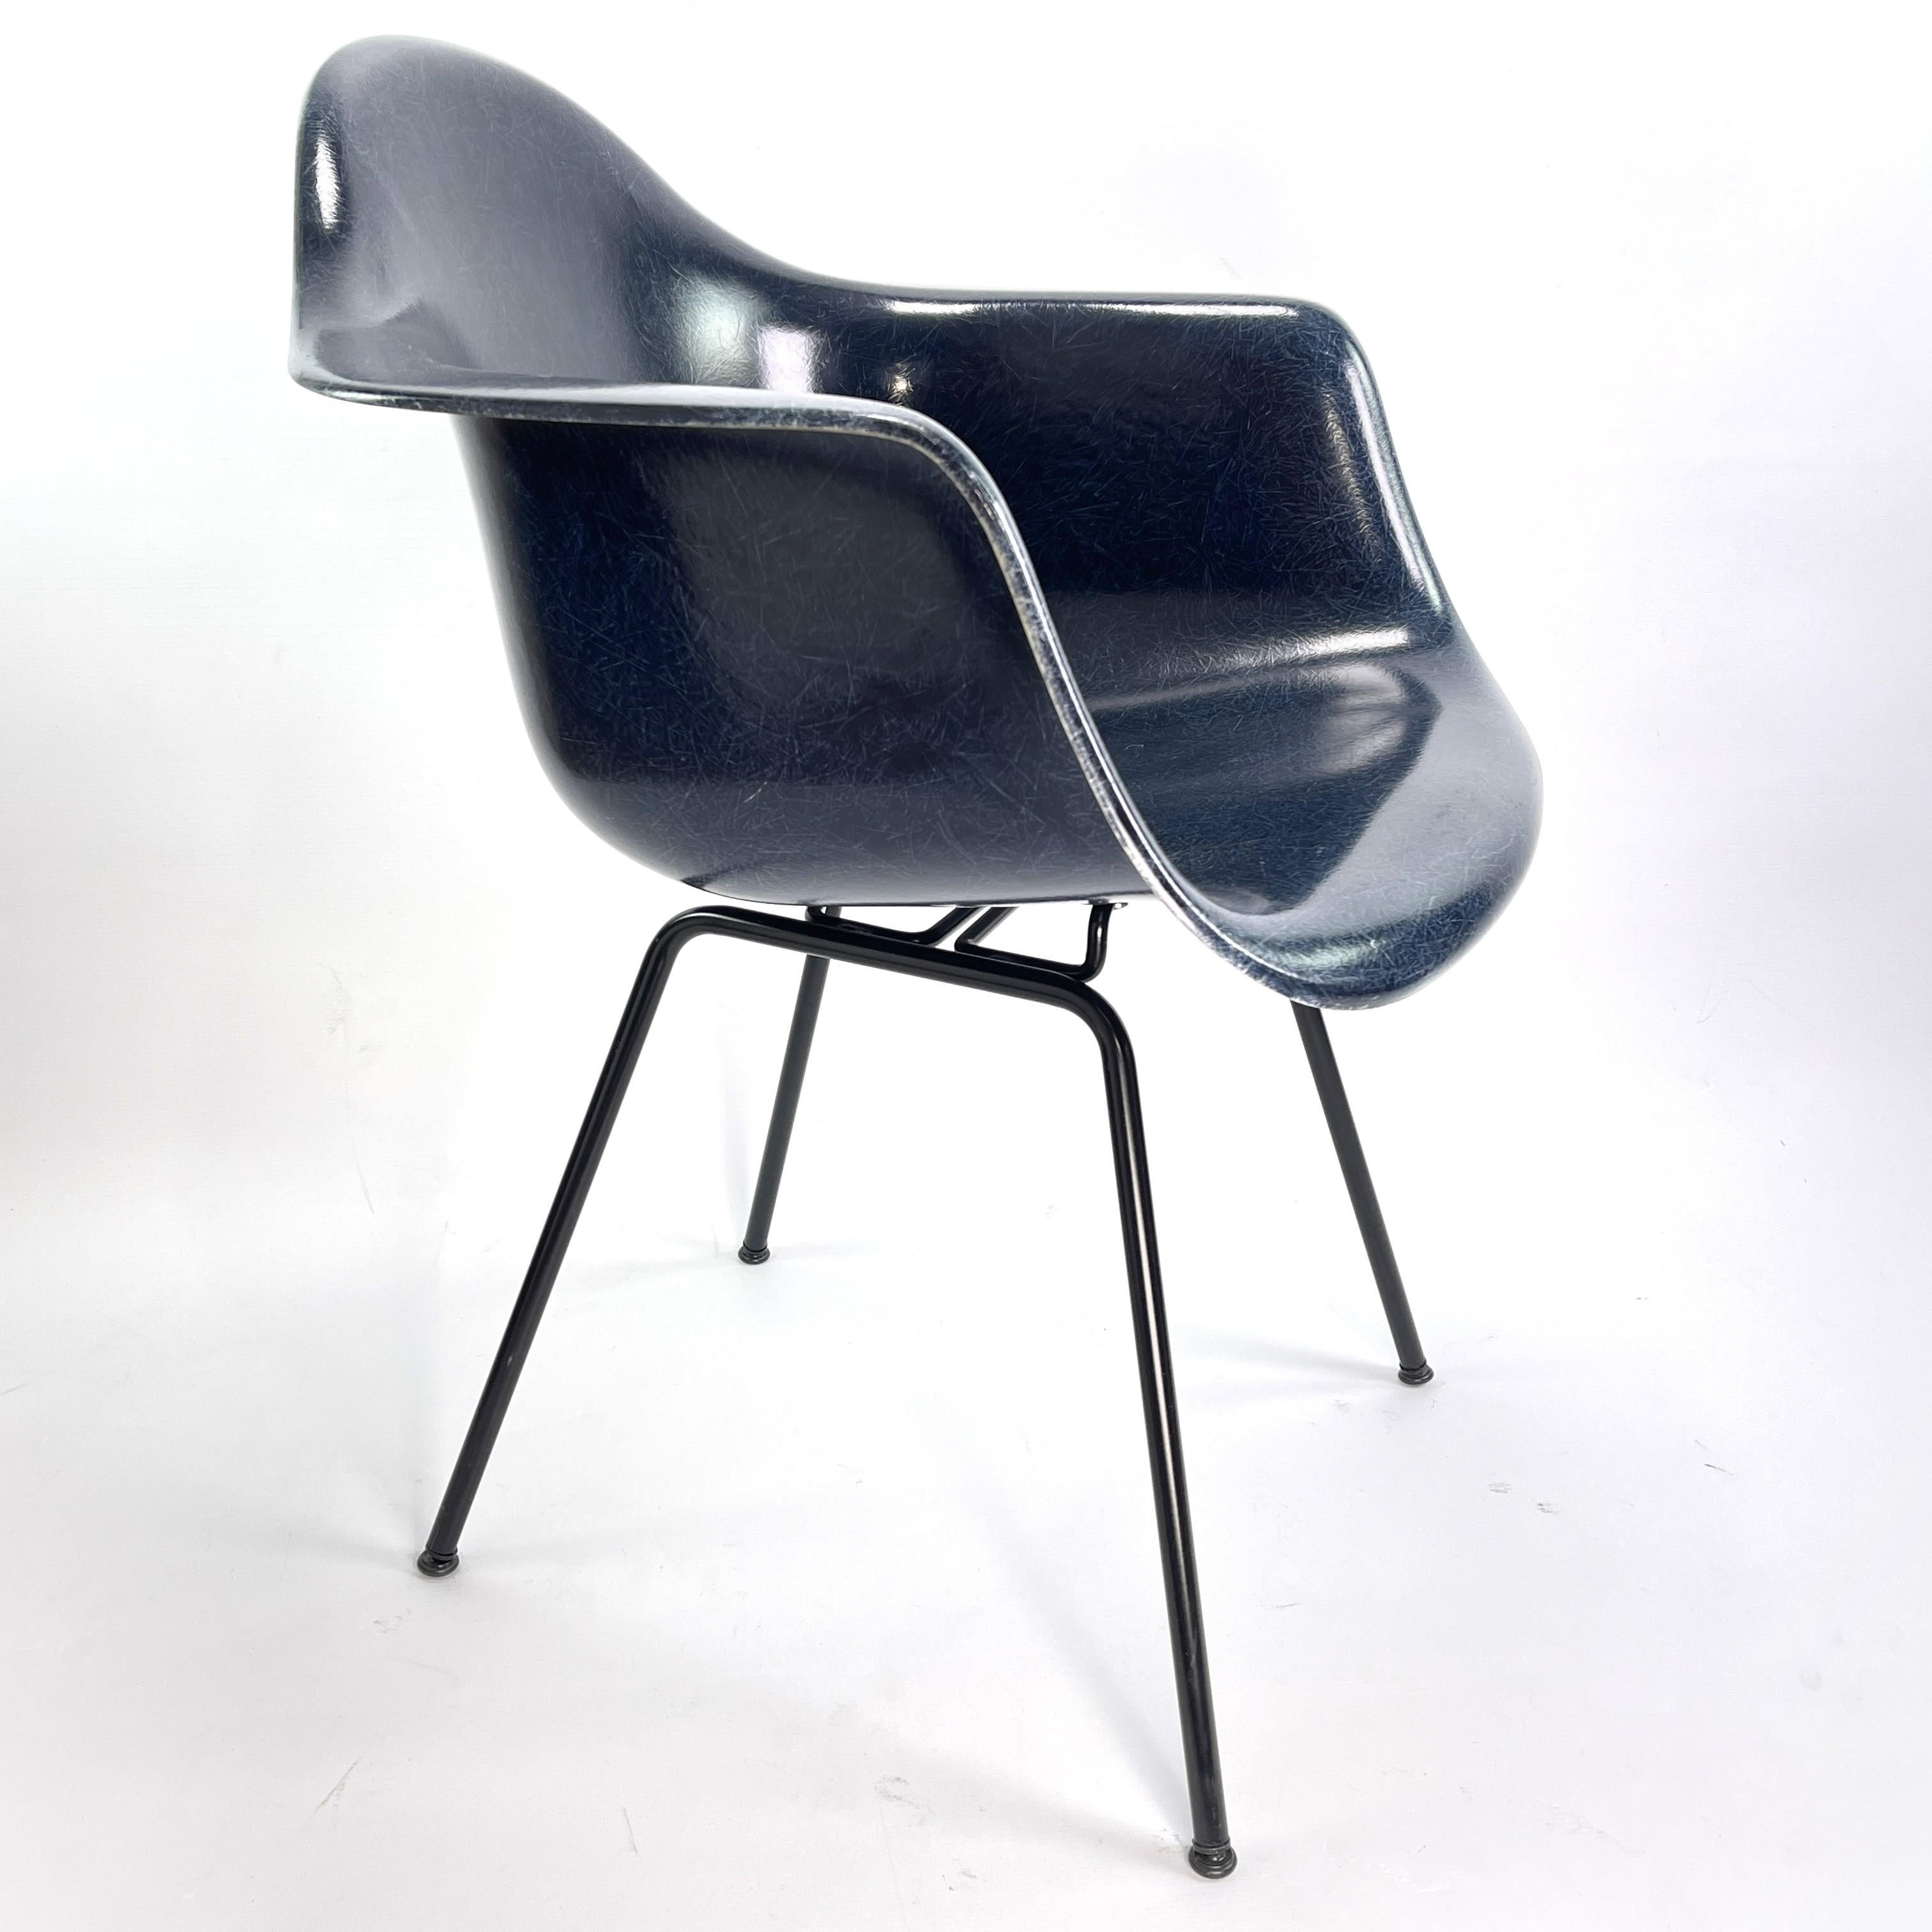 Charles Eames Modernica Los Angeles Armchair Seat Fibreglass Chair

The fibreglass armchair by the designer duo Charles and Ray Eames is certainly one of the most important and best-known designs of the 20th century. The chair was originally